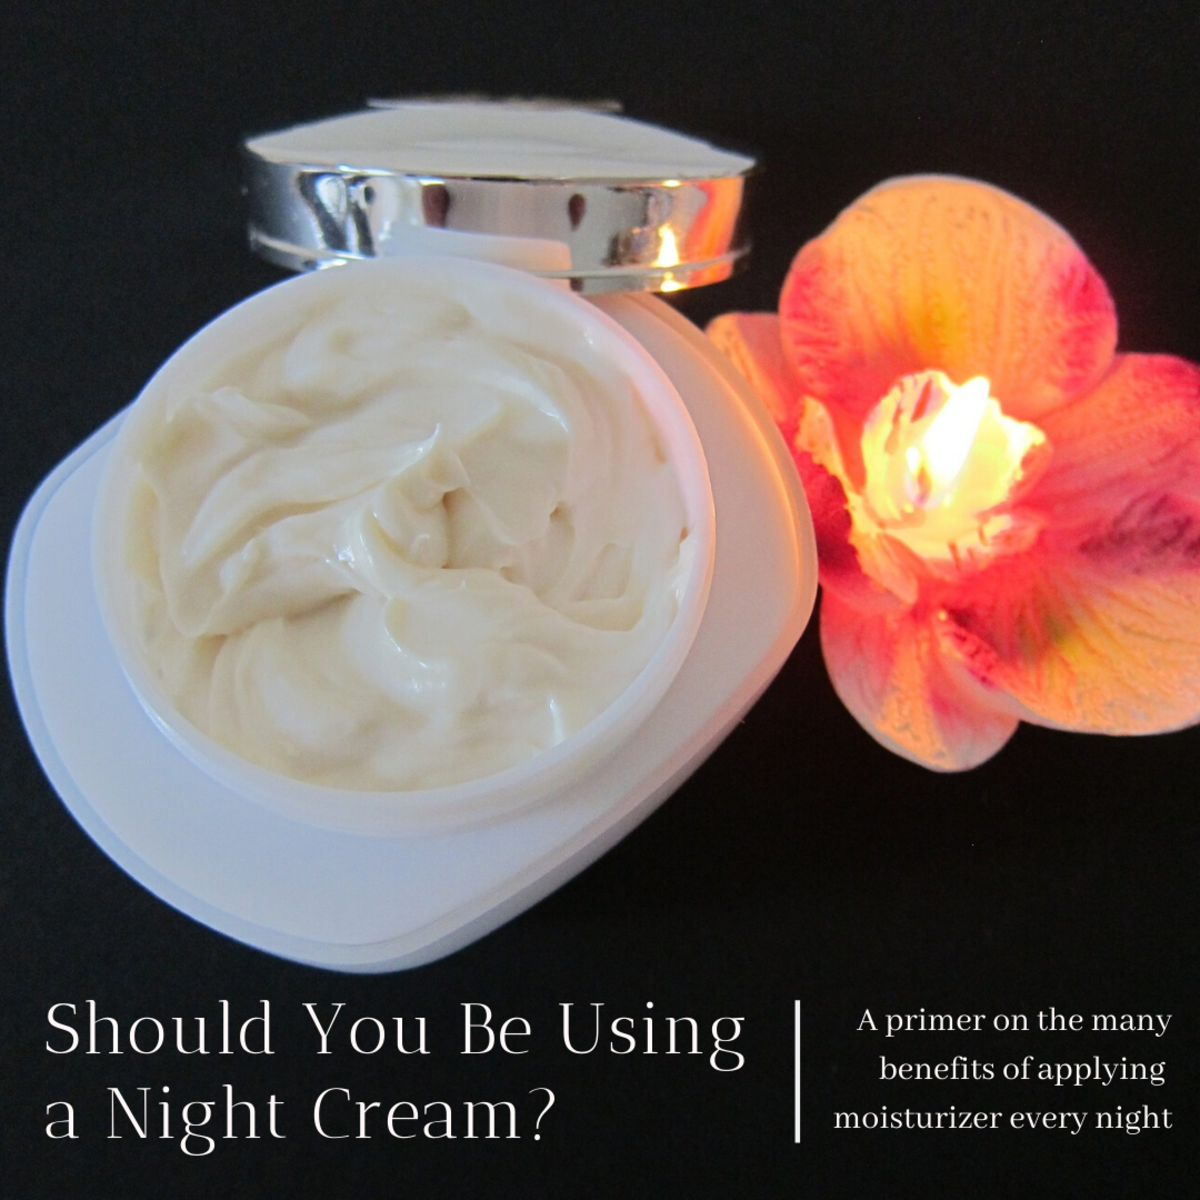 Overnight Moisturizers: Why Should You Use a Night Cream?